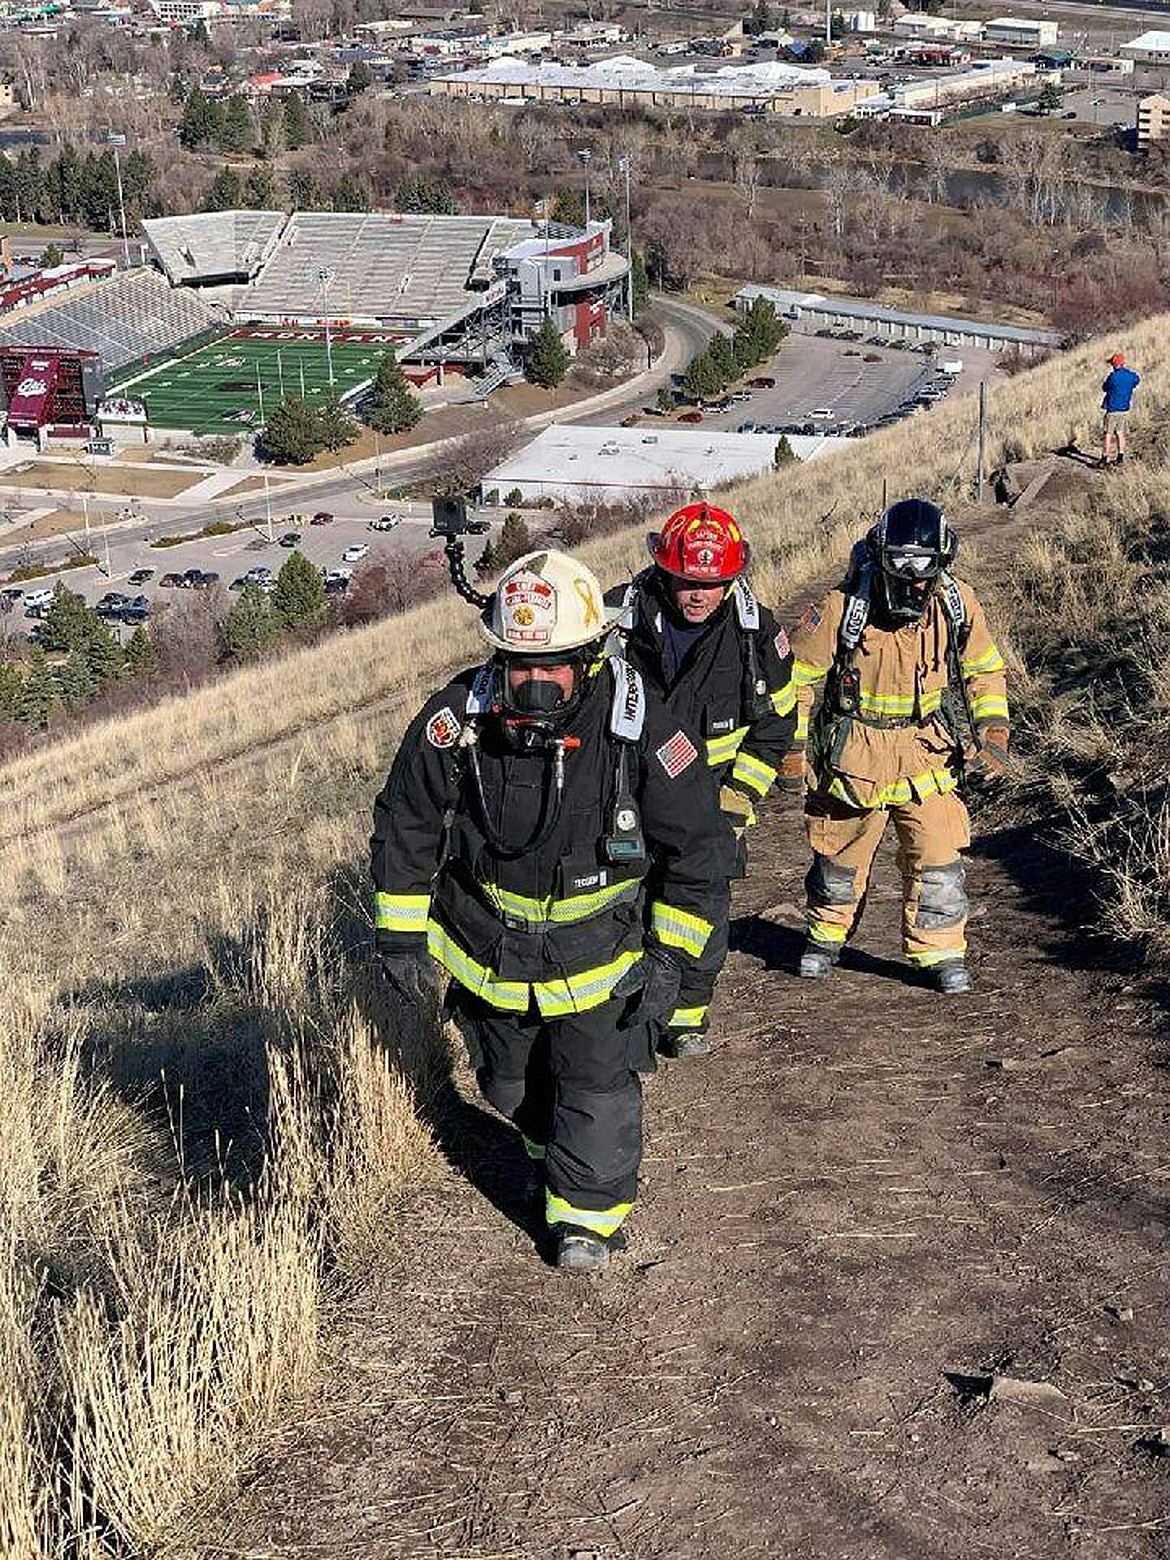 Local firefighters head up Mount Sentinel in Missoula last Sunday. Firefighters from Plains-Paradise and Hot Springs were going to walk up 69 levels of the Columbia Tower in Seattle Sunday, but the coronavirus altered their plans. (Photo courtesy Braden Starika)